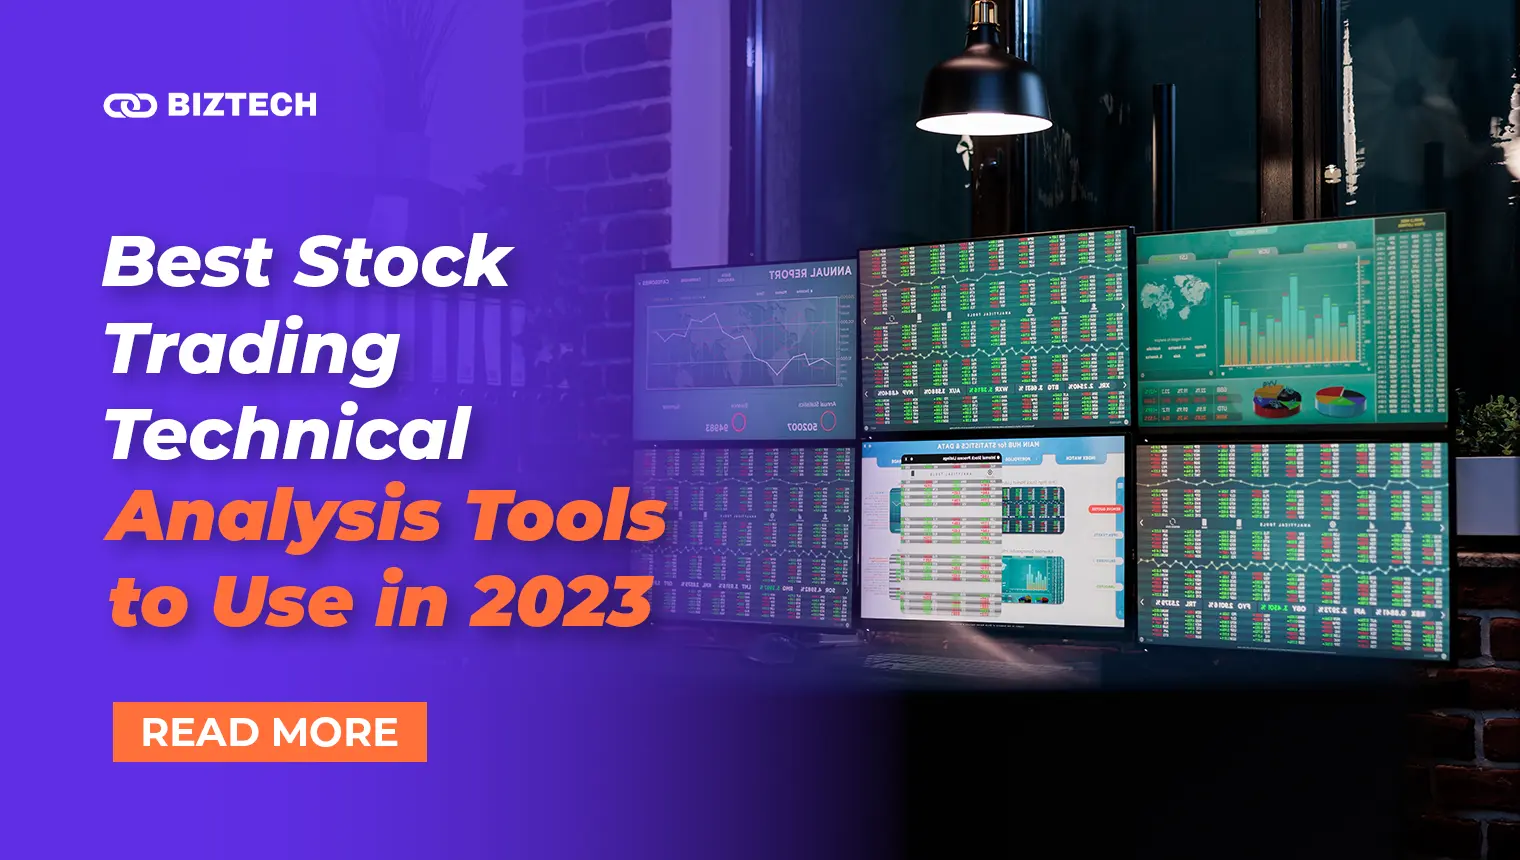 Best Stock Trading Technical Analysis Tools to Use in 2023